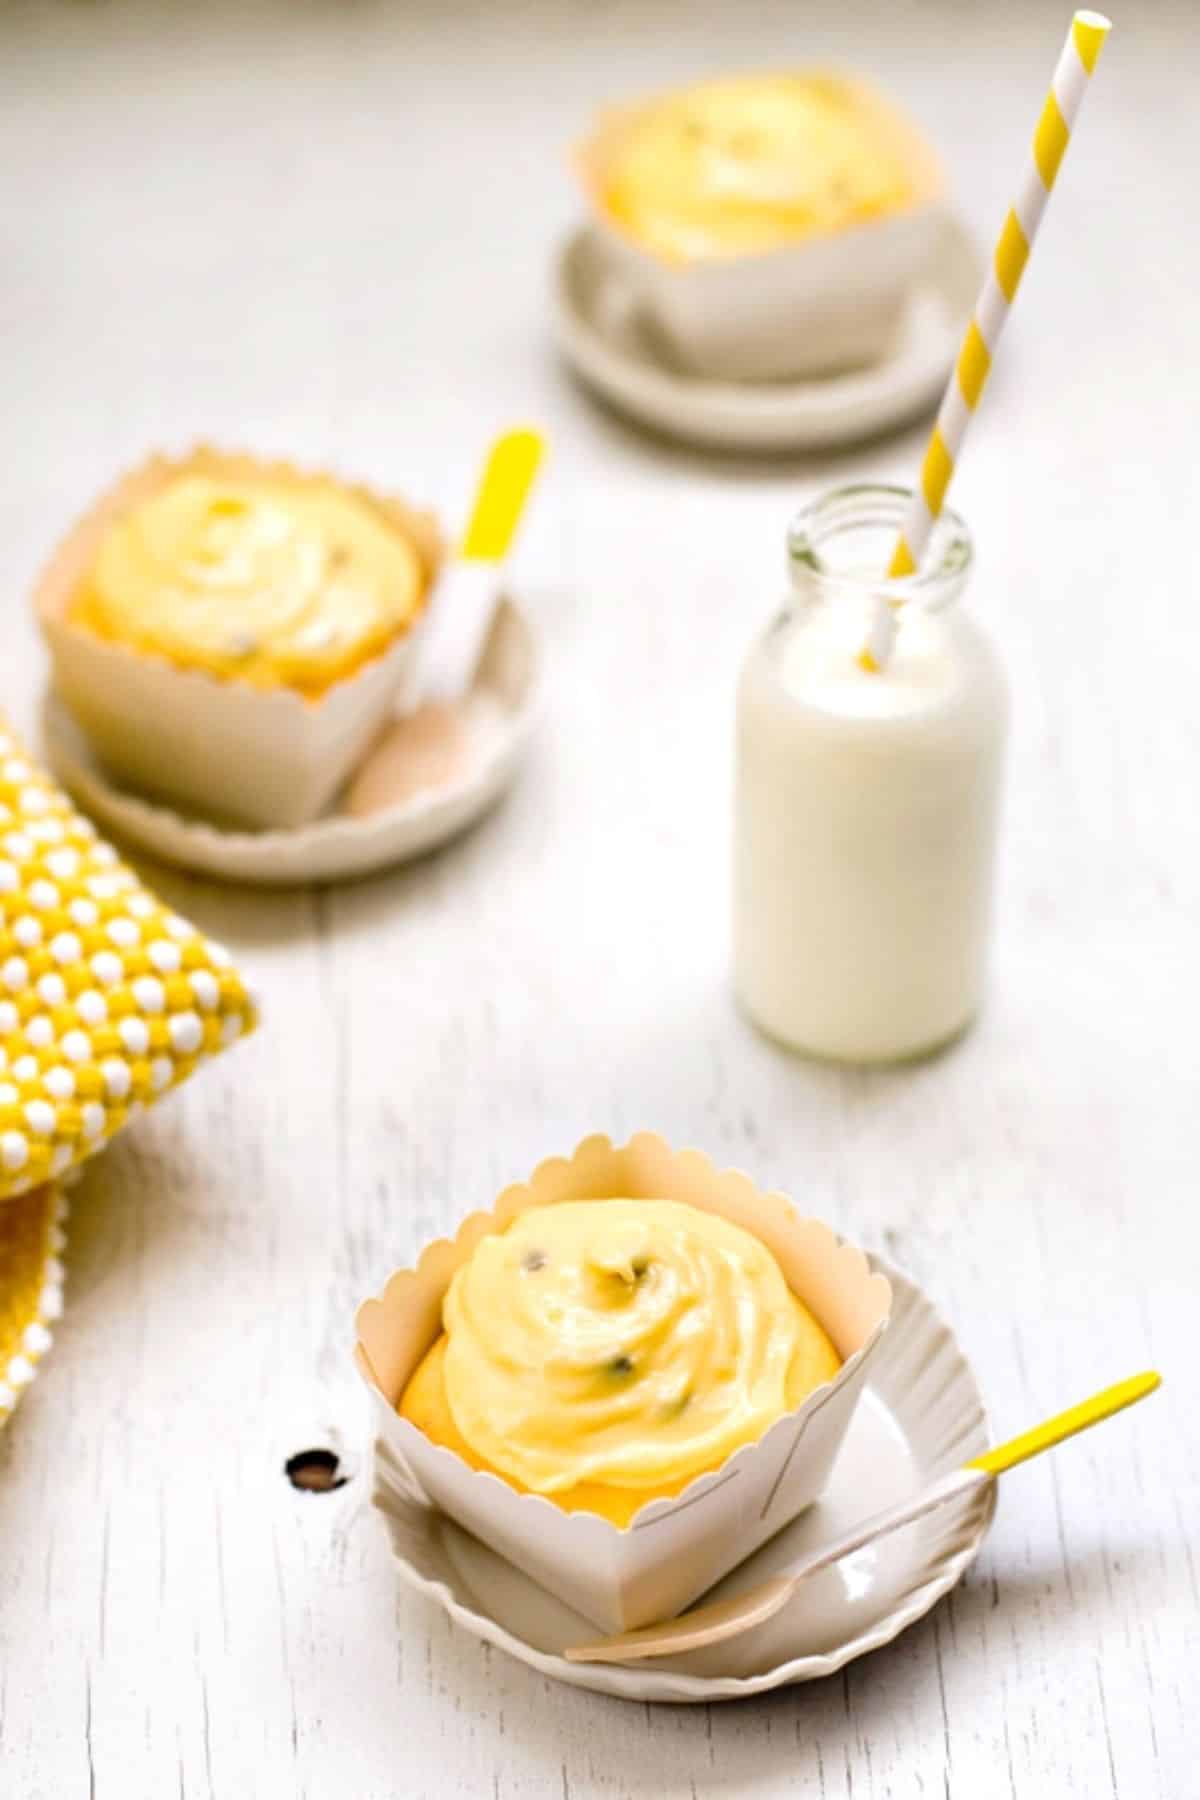 Delicious passion fruit cupcakes on a wooden table.